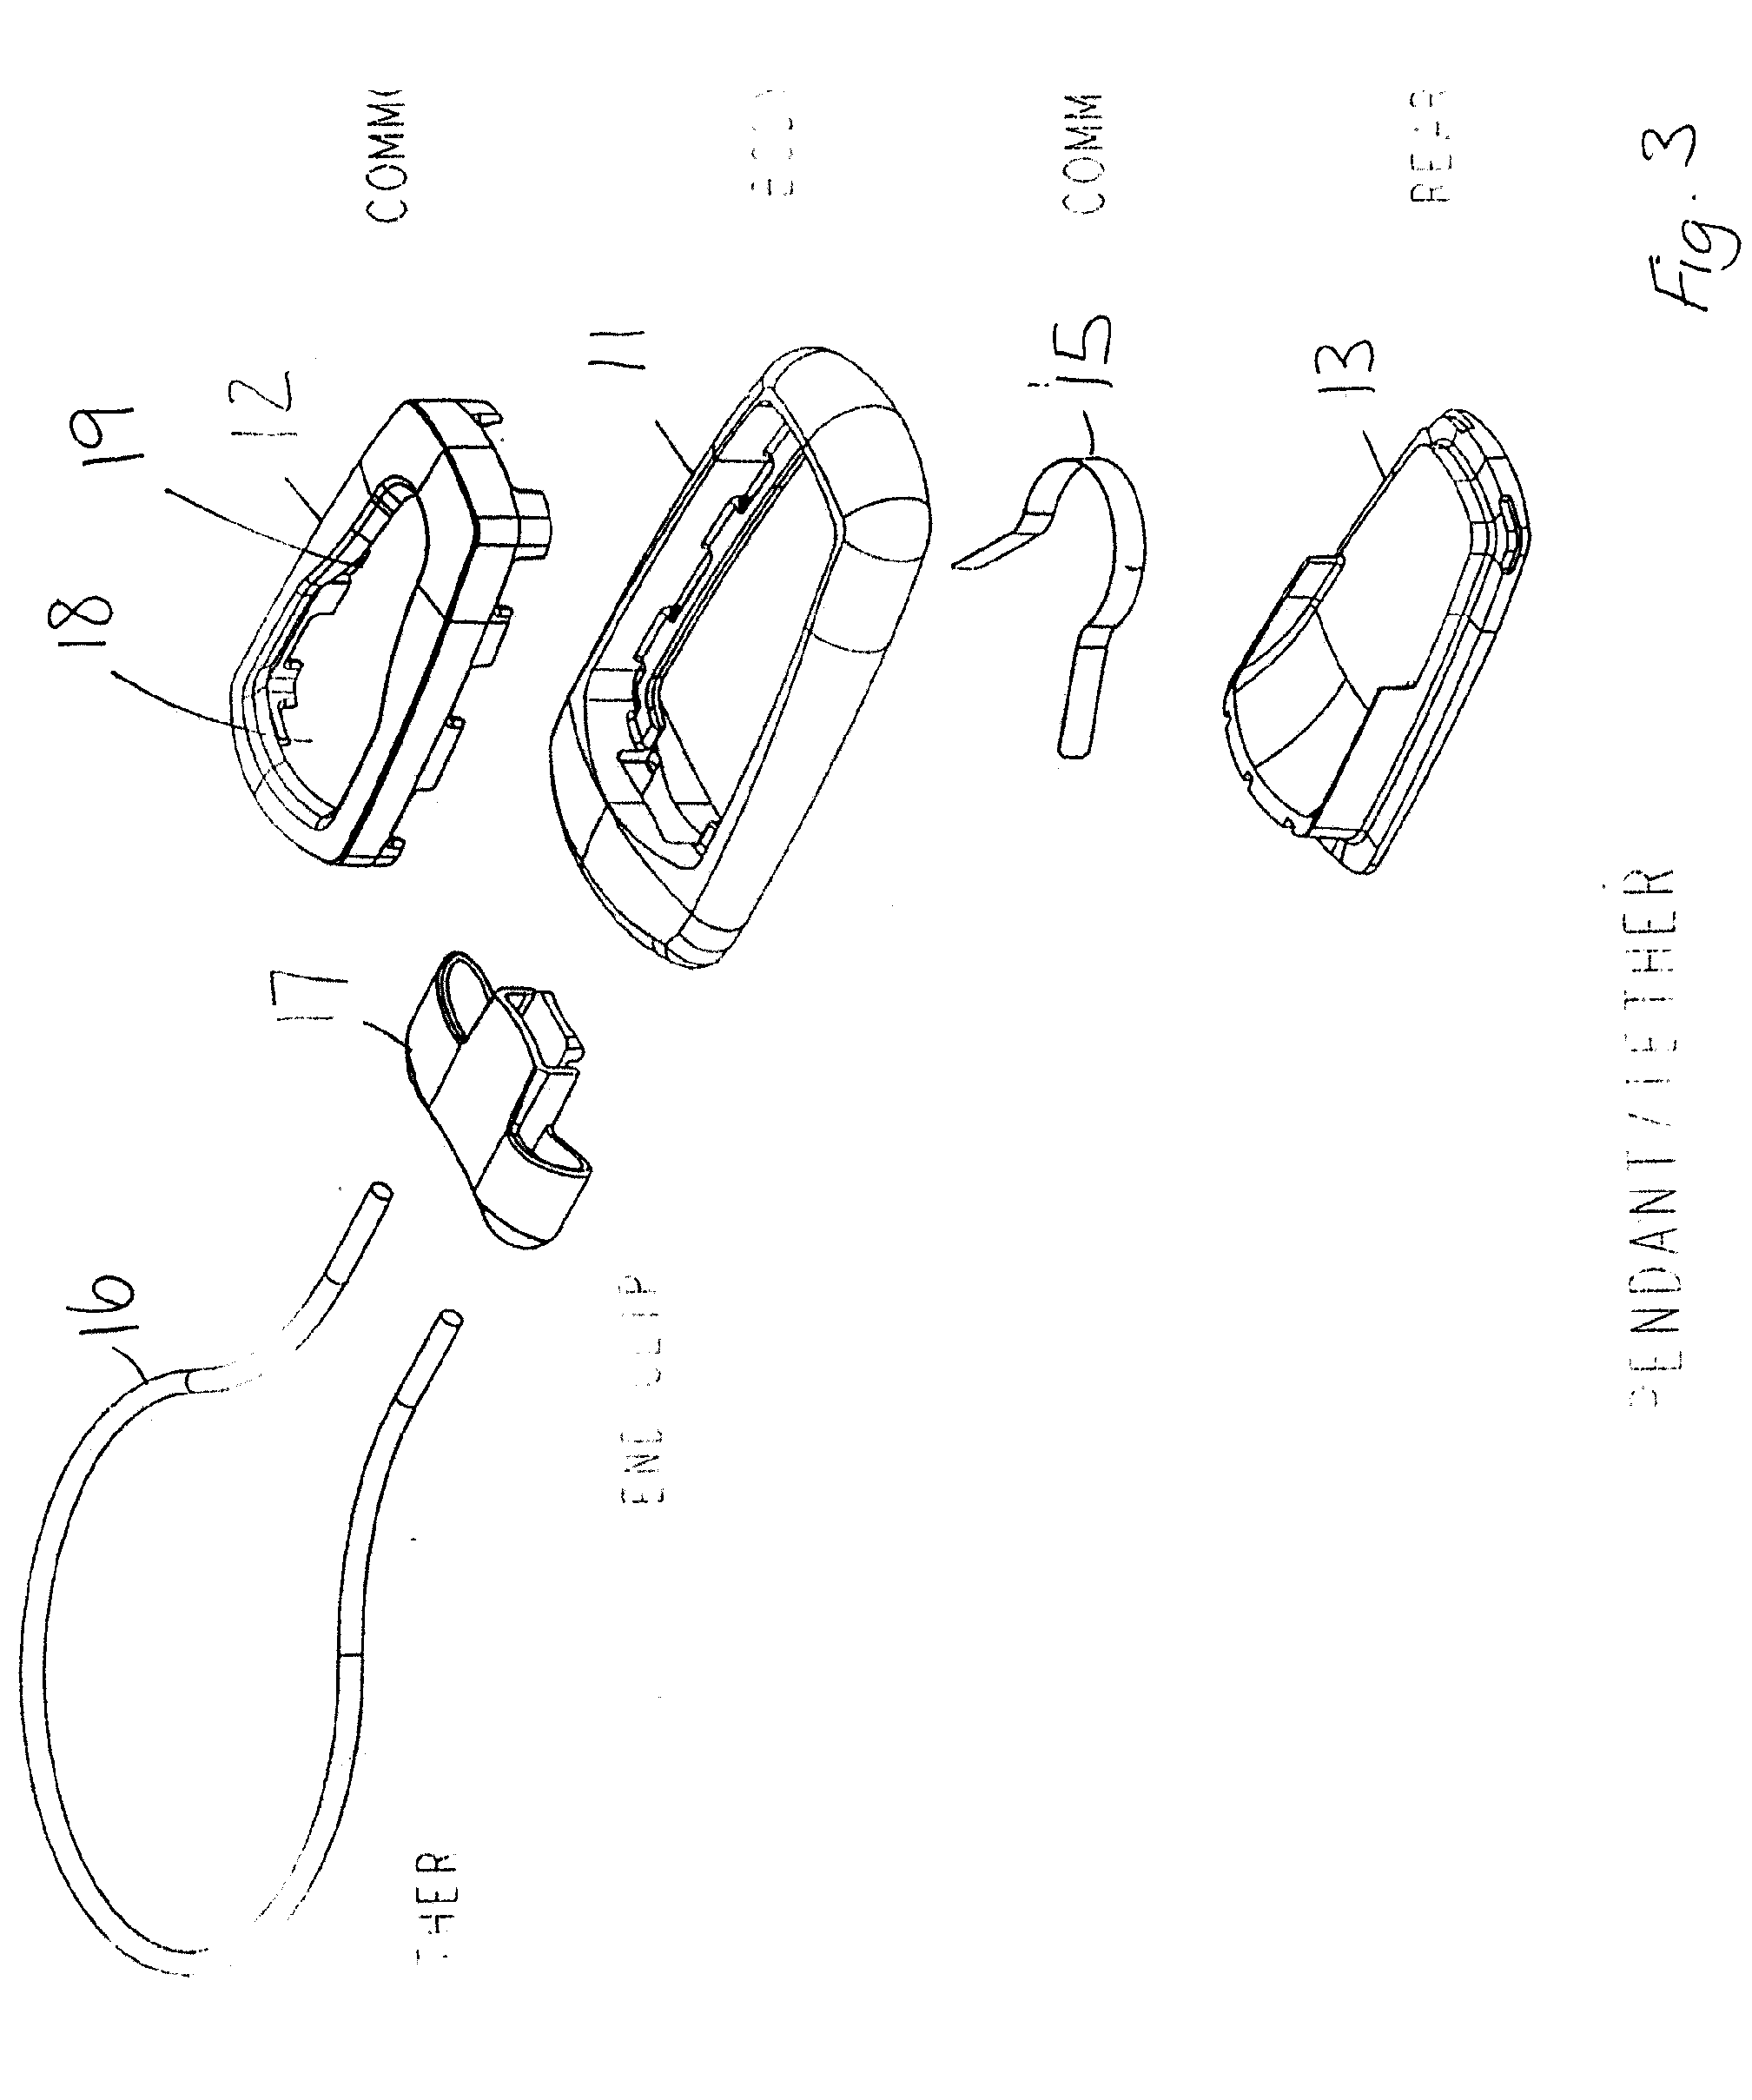 Retractable microphone/speaker lead for a belt clip attachment device for a mobile phone or the like